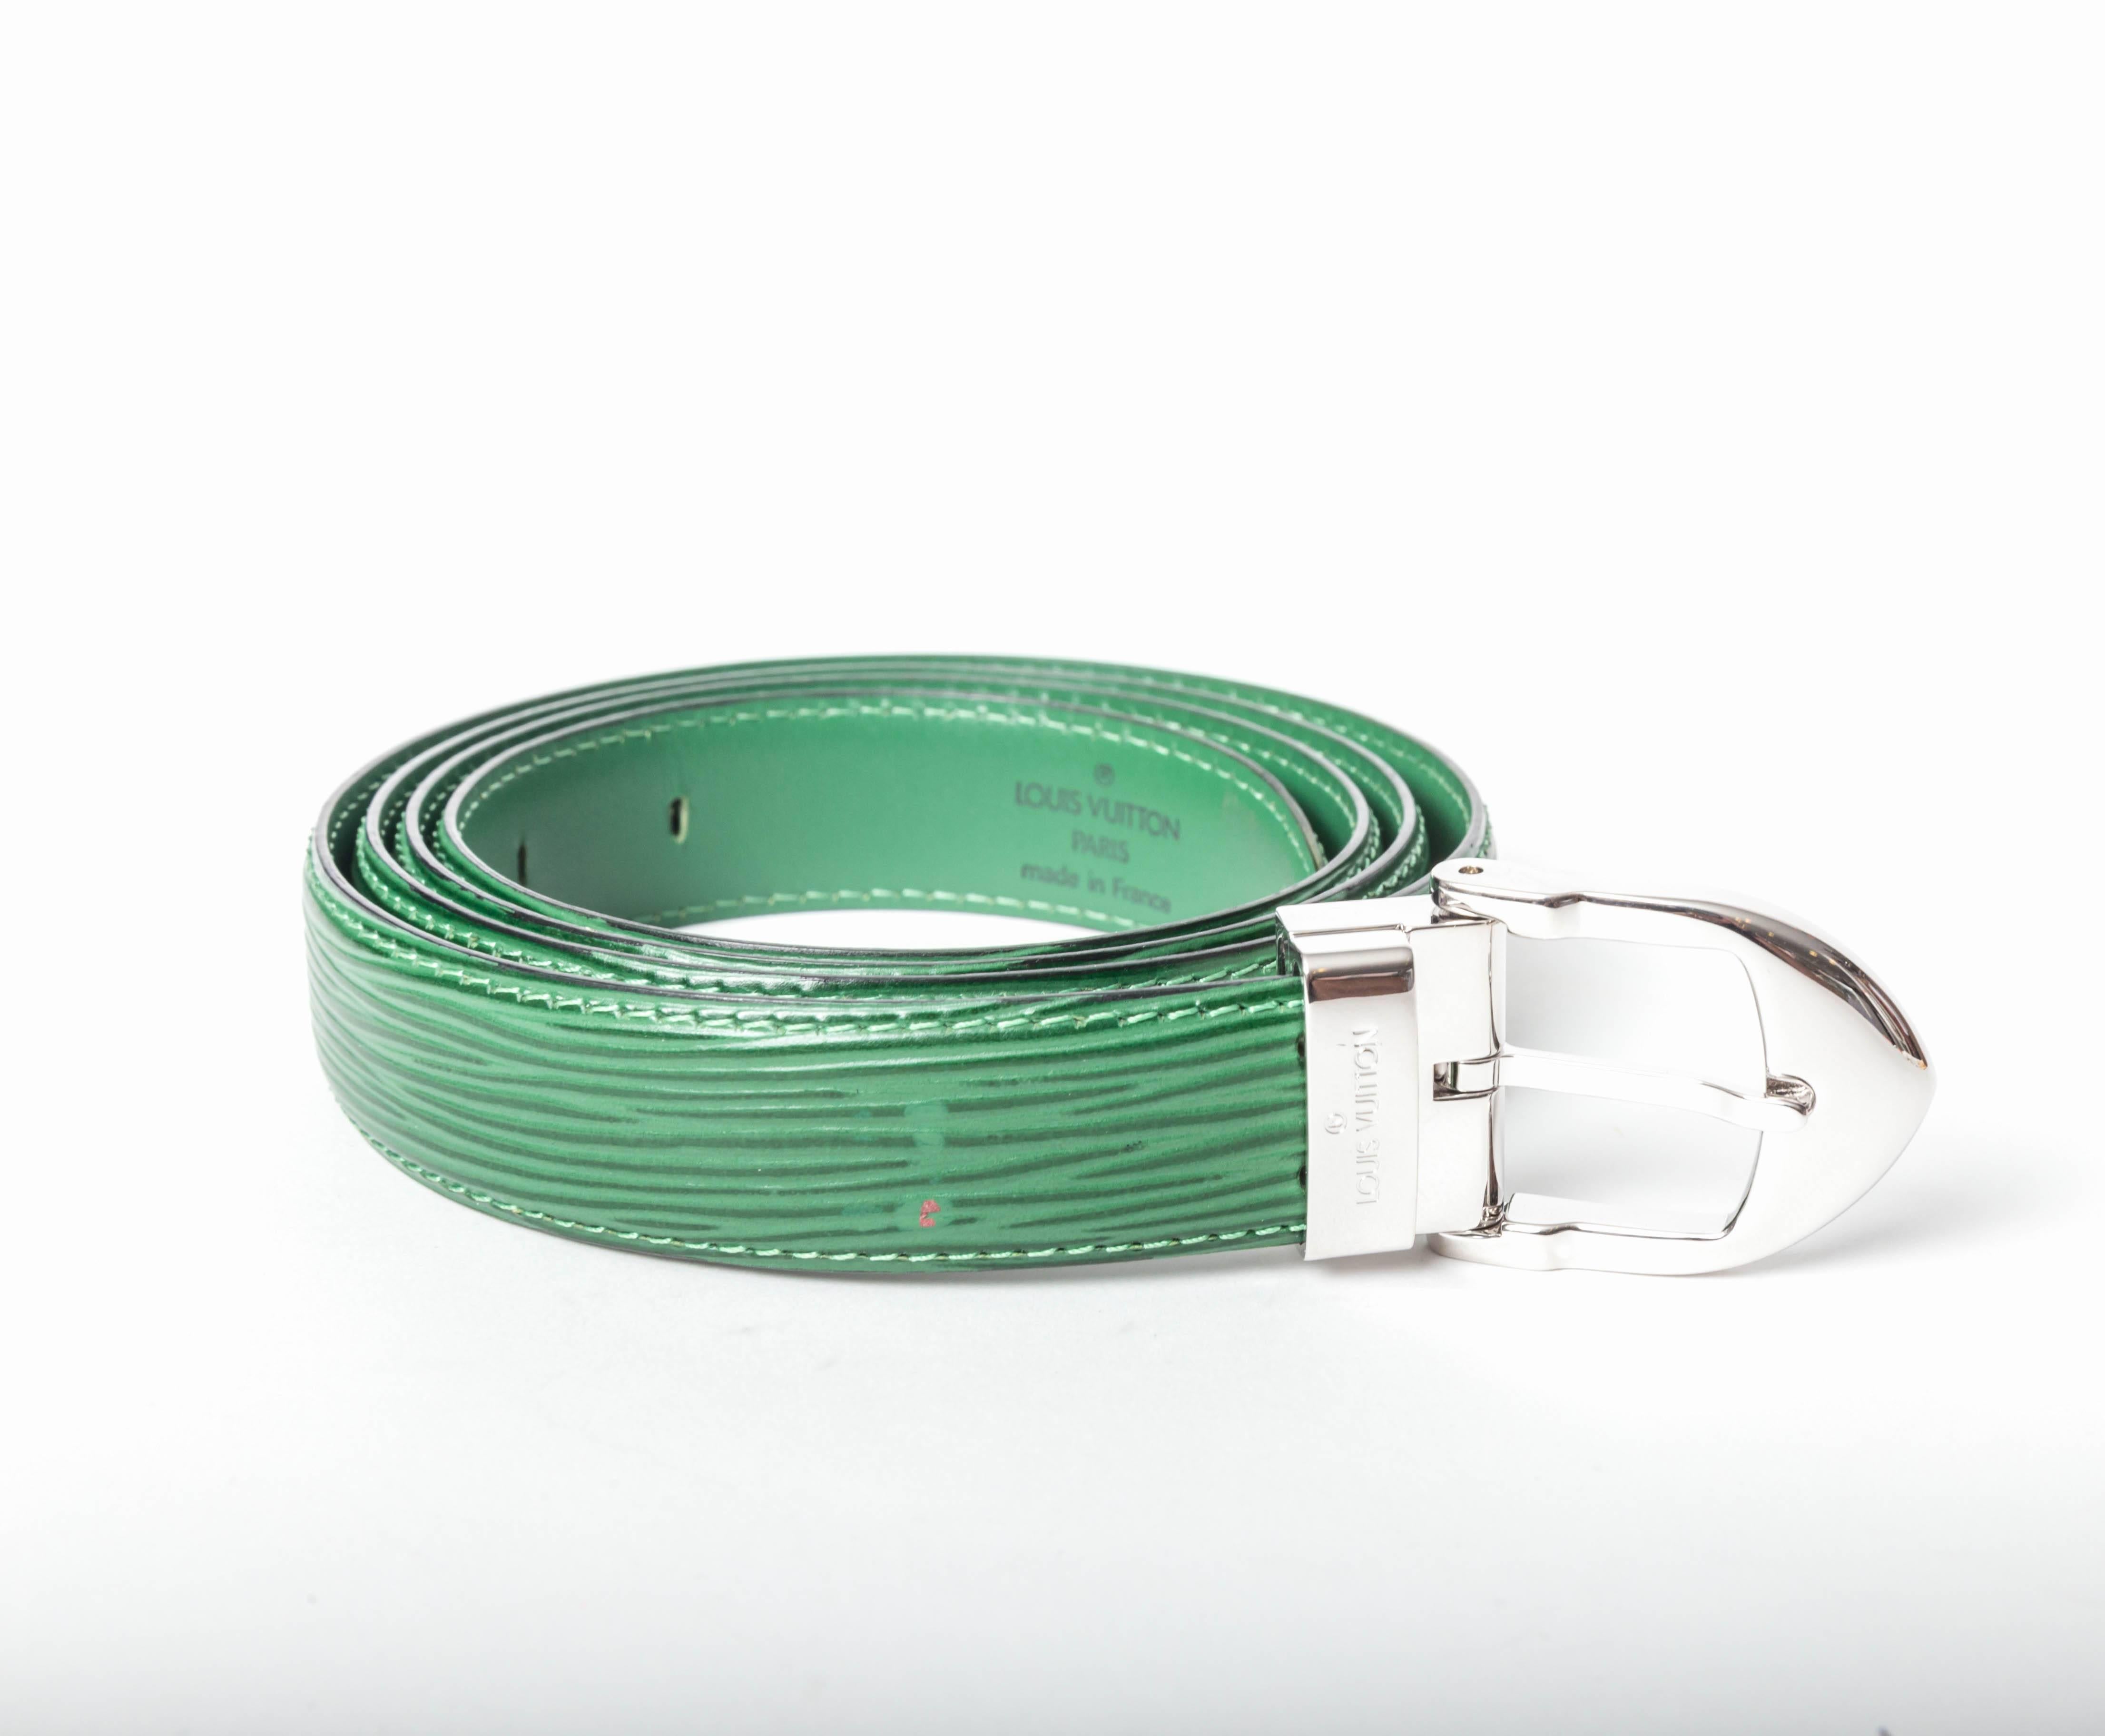 Louis Vuitton Green Epi Belt with Silver and Gold Buckles / New With Box - 44 4